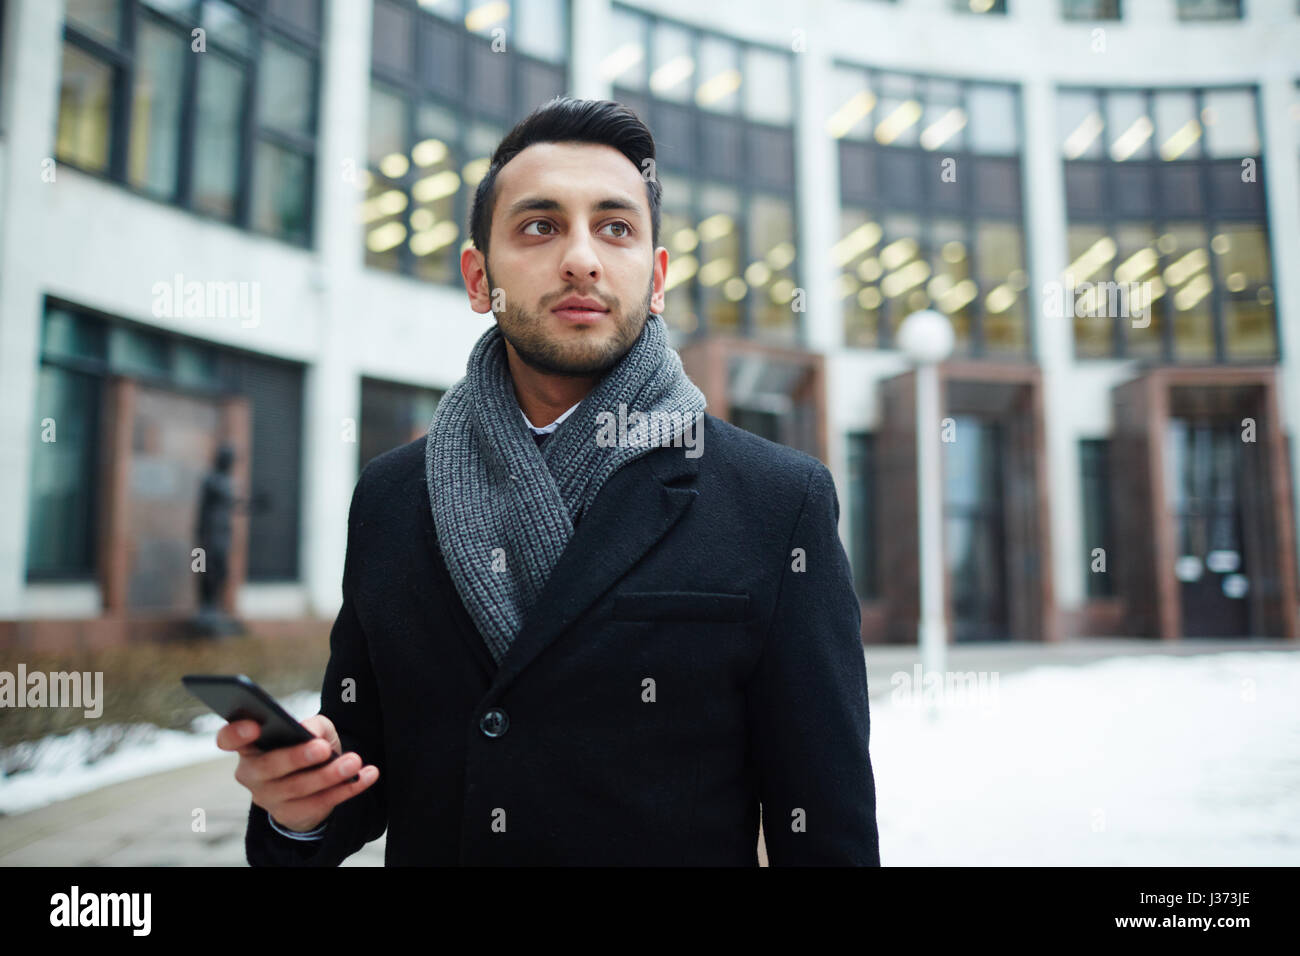 Stylish Middle-Eastern Businessman with Phone Stock Photo